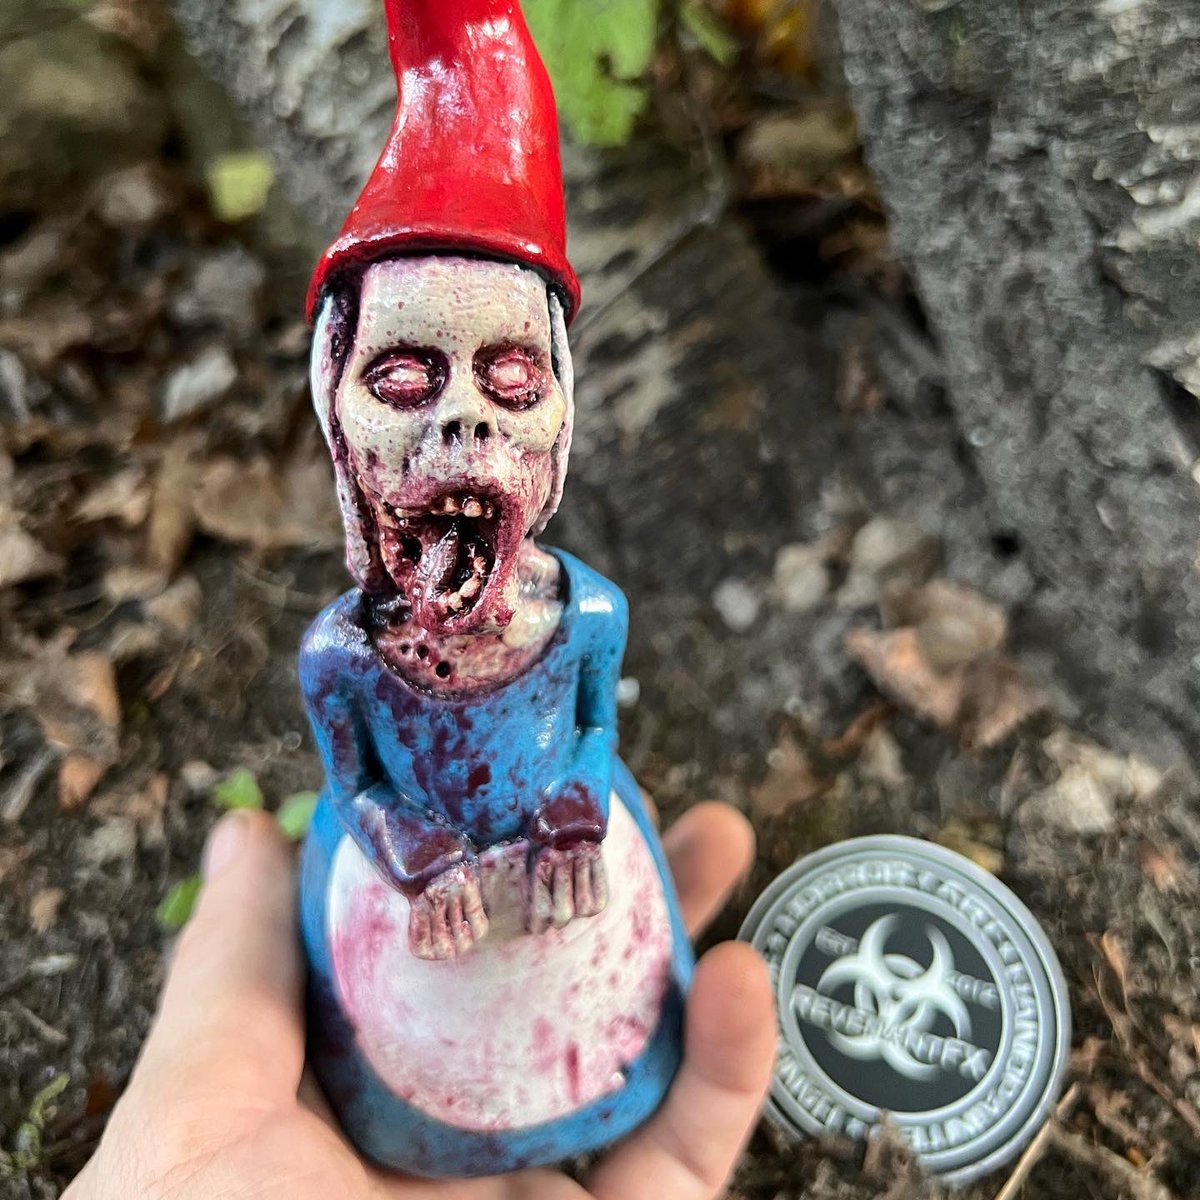 The Joy Of Gnoming: Gnorma Lee Shouldbedead The Bite Size #ZombieGnome Is A Frightfully Jaw-Dropping Gnome For Your Home!😜🧟‍♂️💀🎨👻
.
.
.
#RevenantFX #Zombiegnomes #Zombiegardengnome #Zombie #Zombies #Gnome #Gnomelife #Gnomelove #Gnomegarden #Handmade #Handpainted #Sculpture #Art